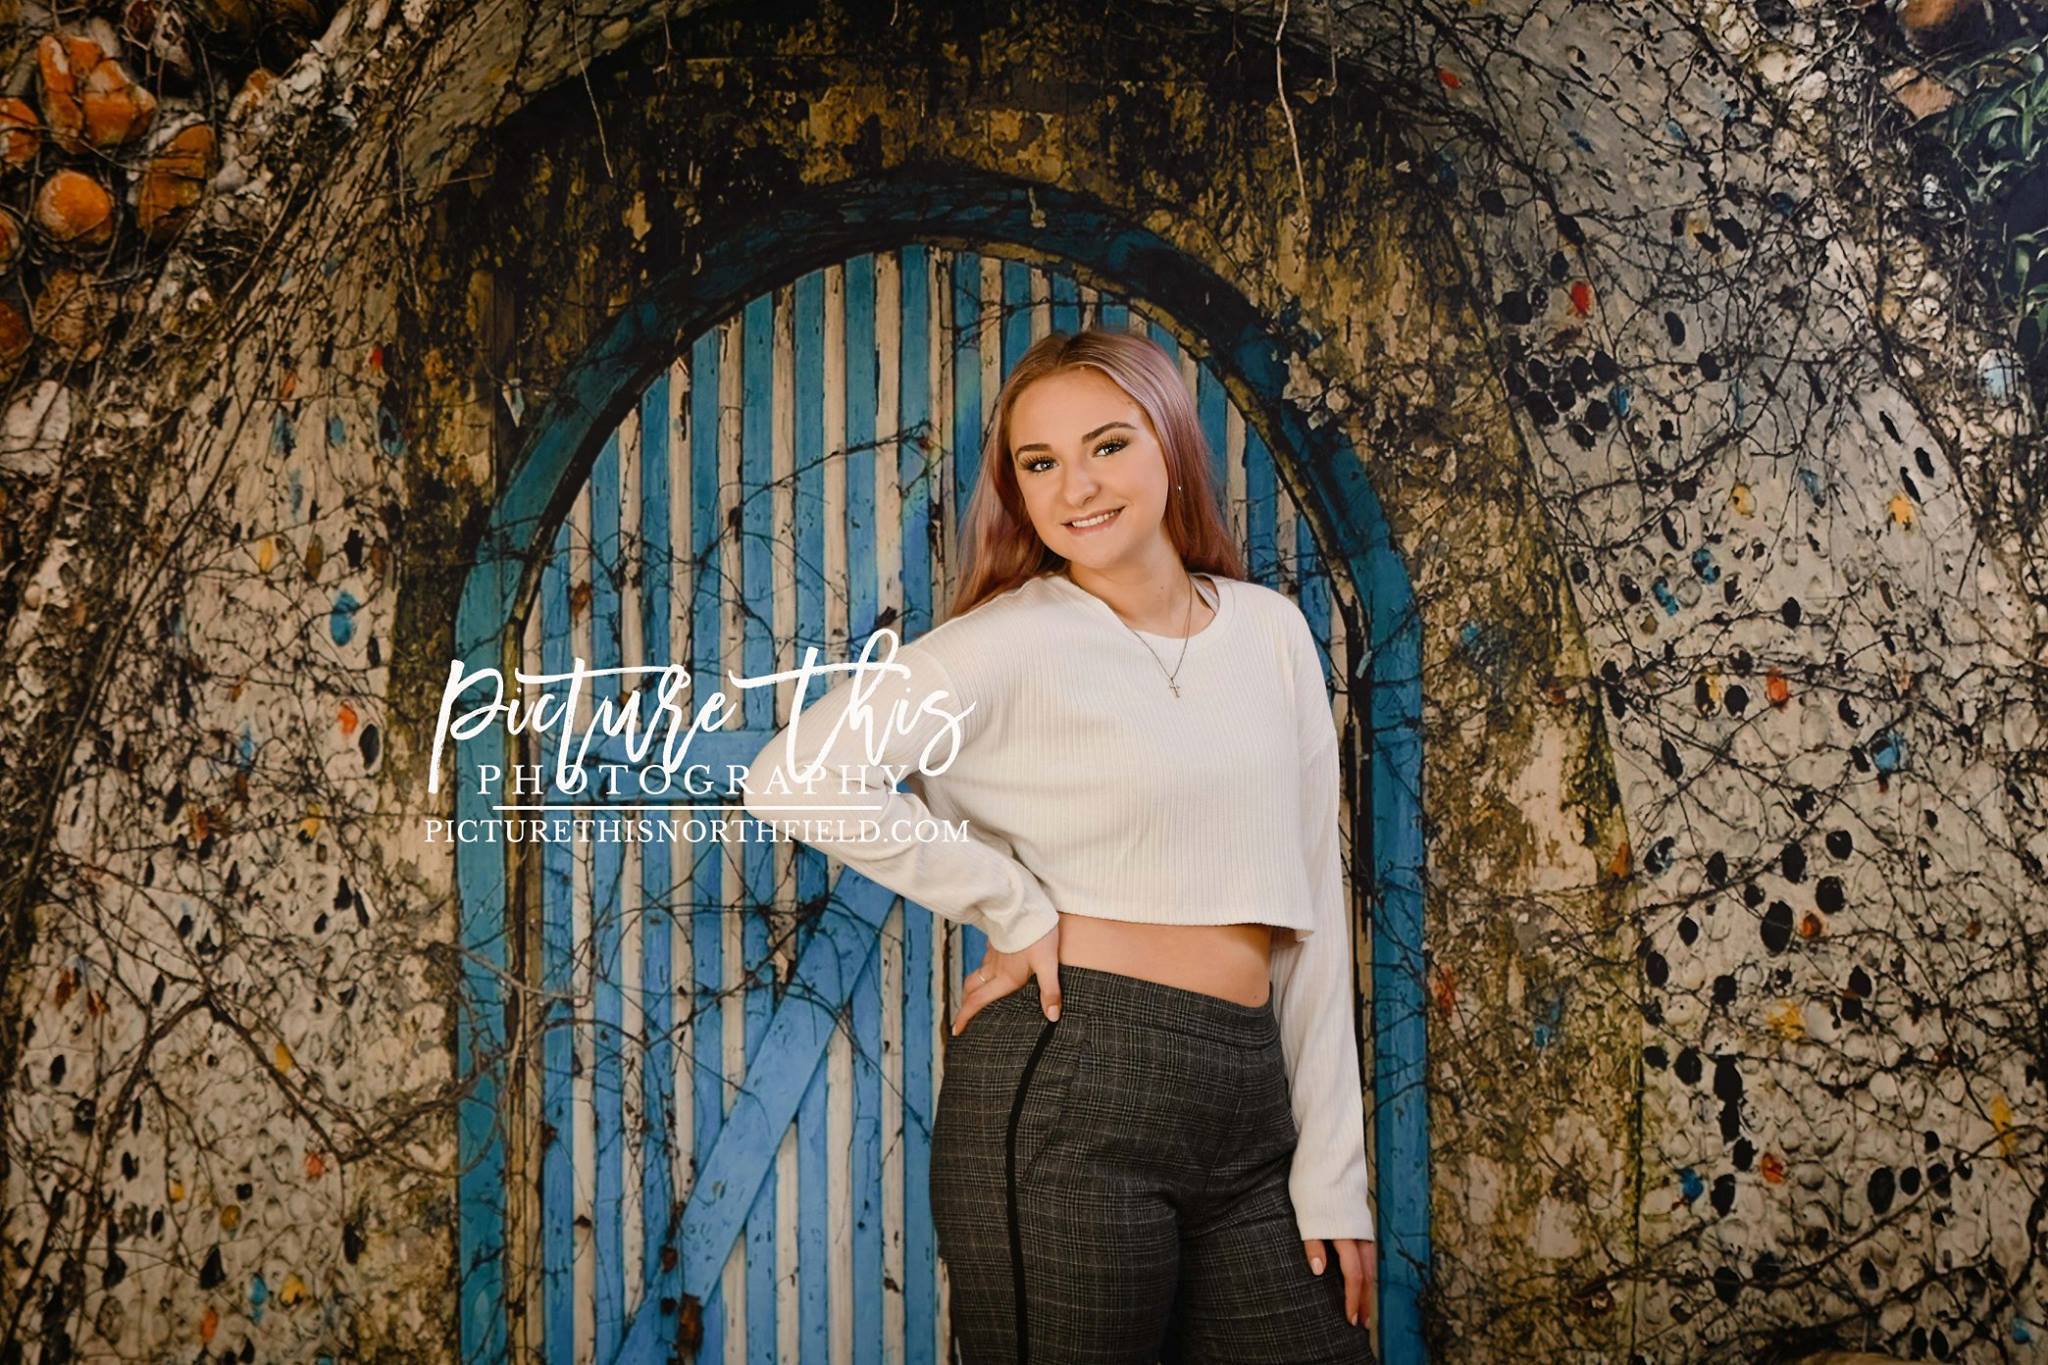 Kate Cool Blue Barn Door Backdrop designed by Jerry_Sina